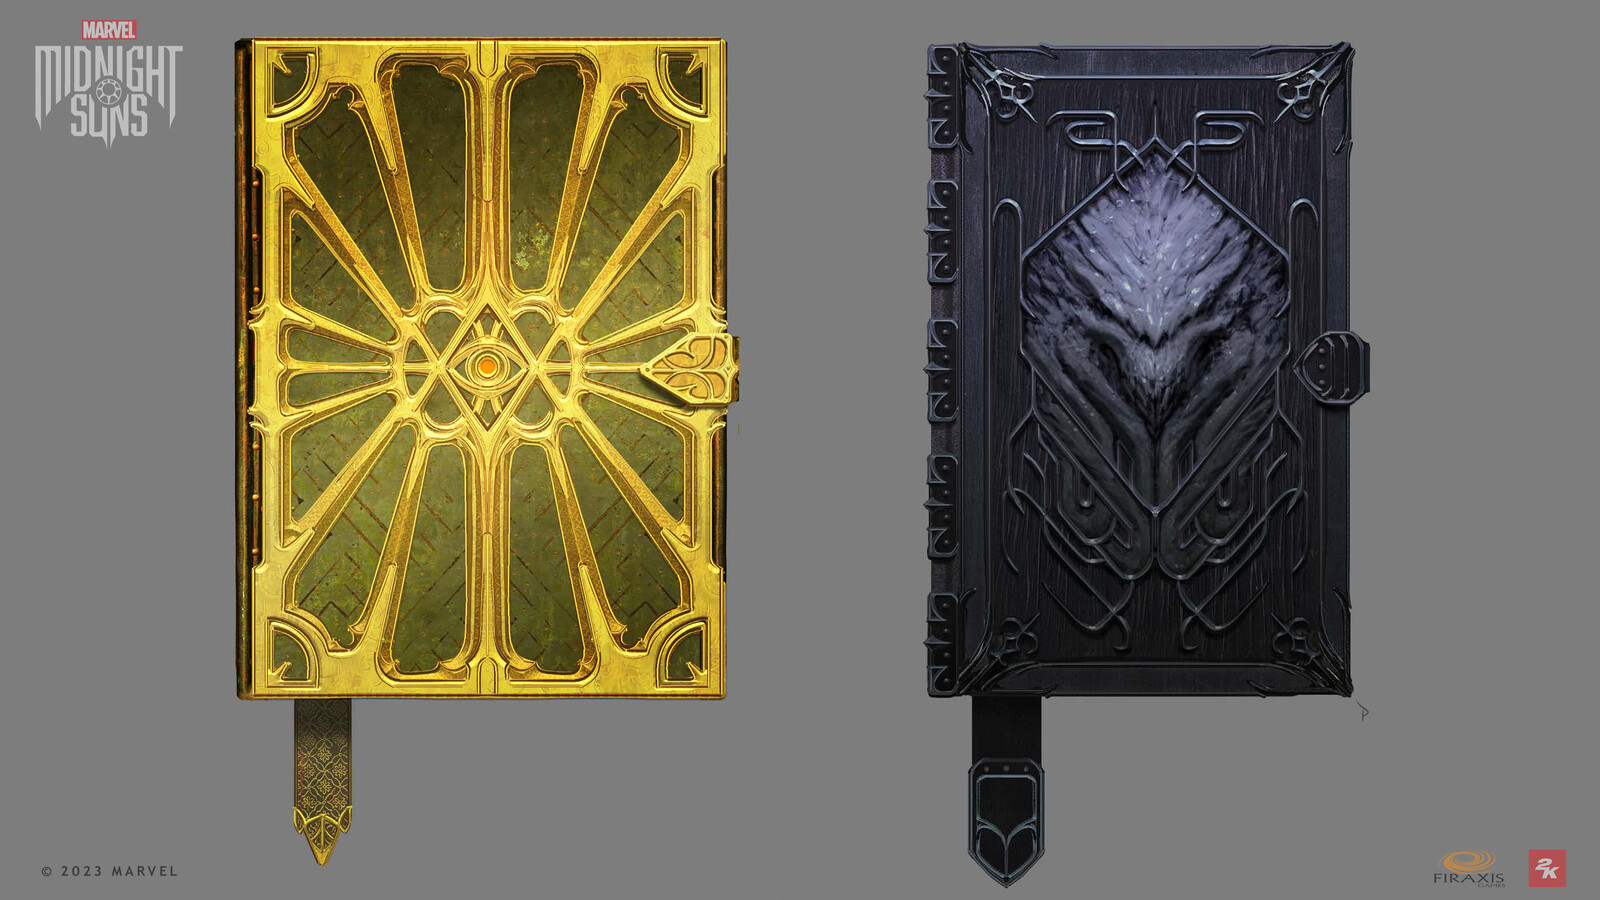 The Book of Vishanti and The Darkhold, side by side.